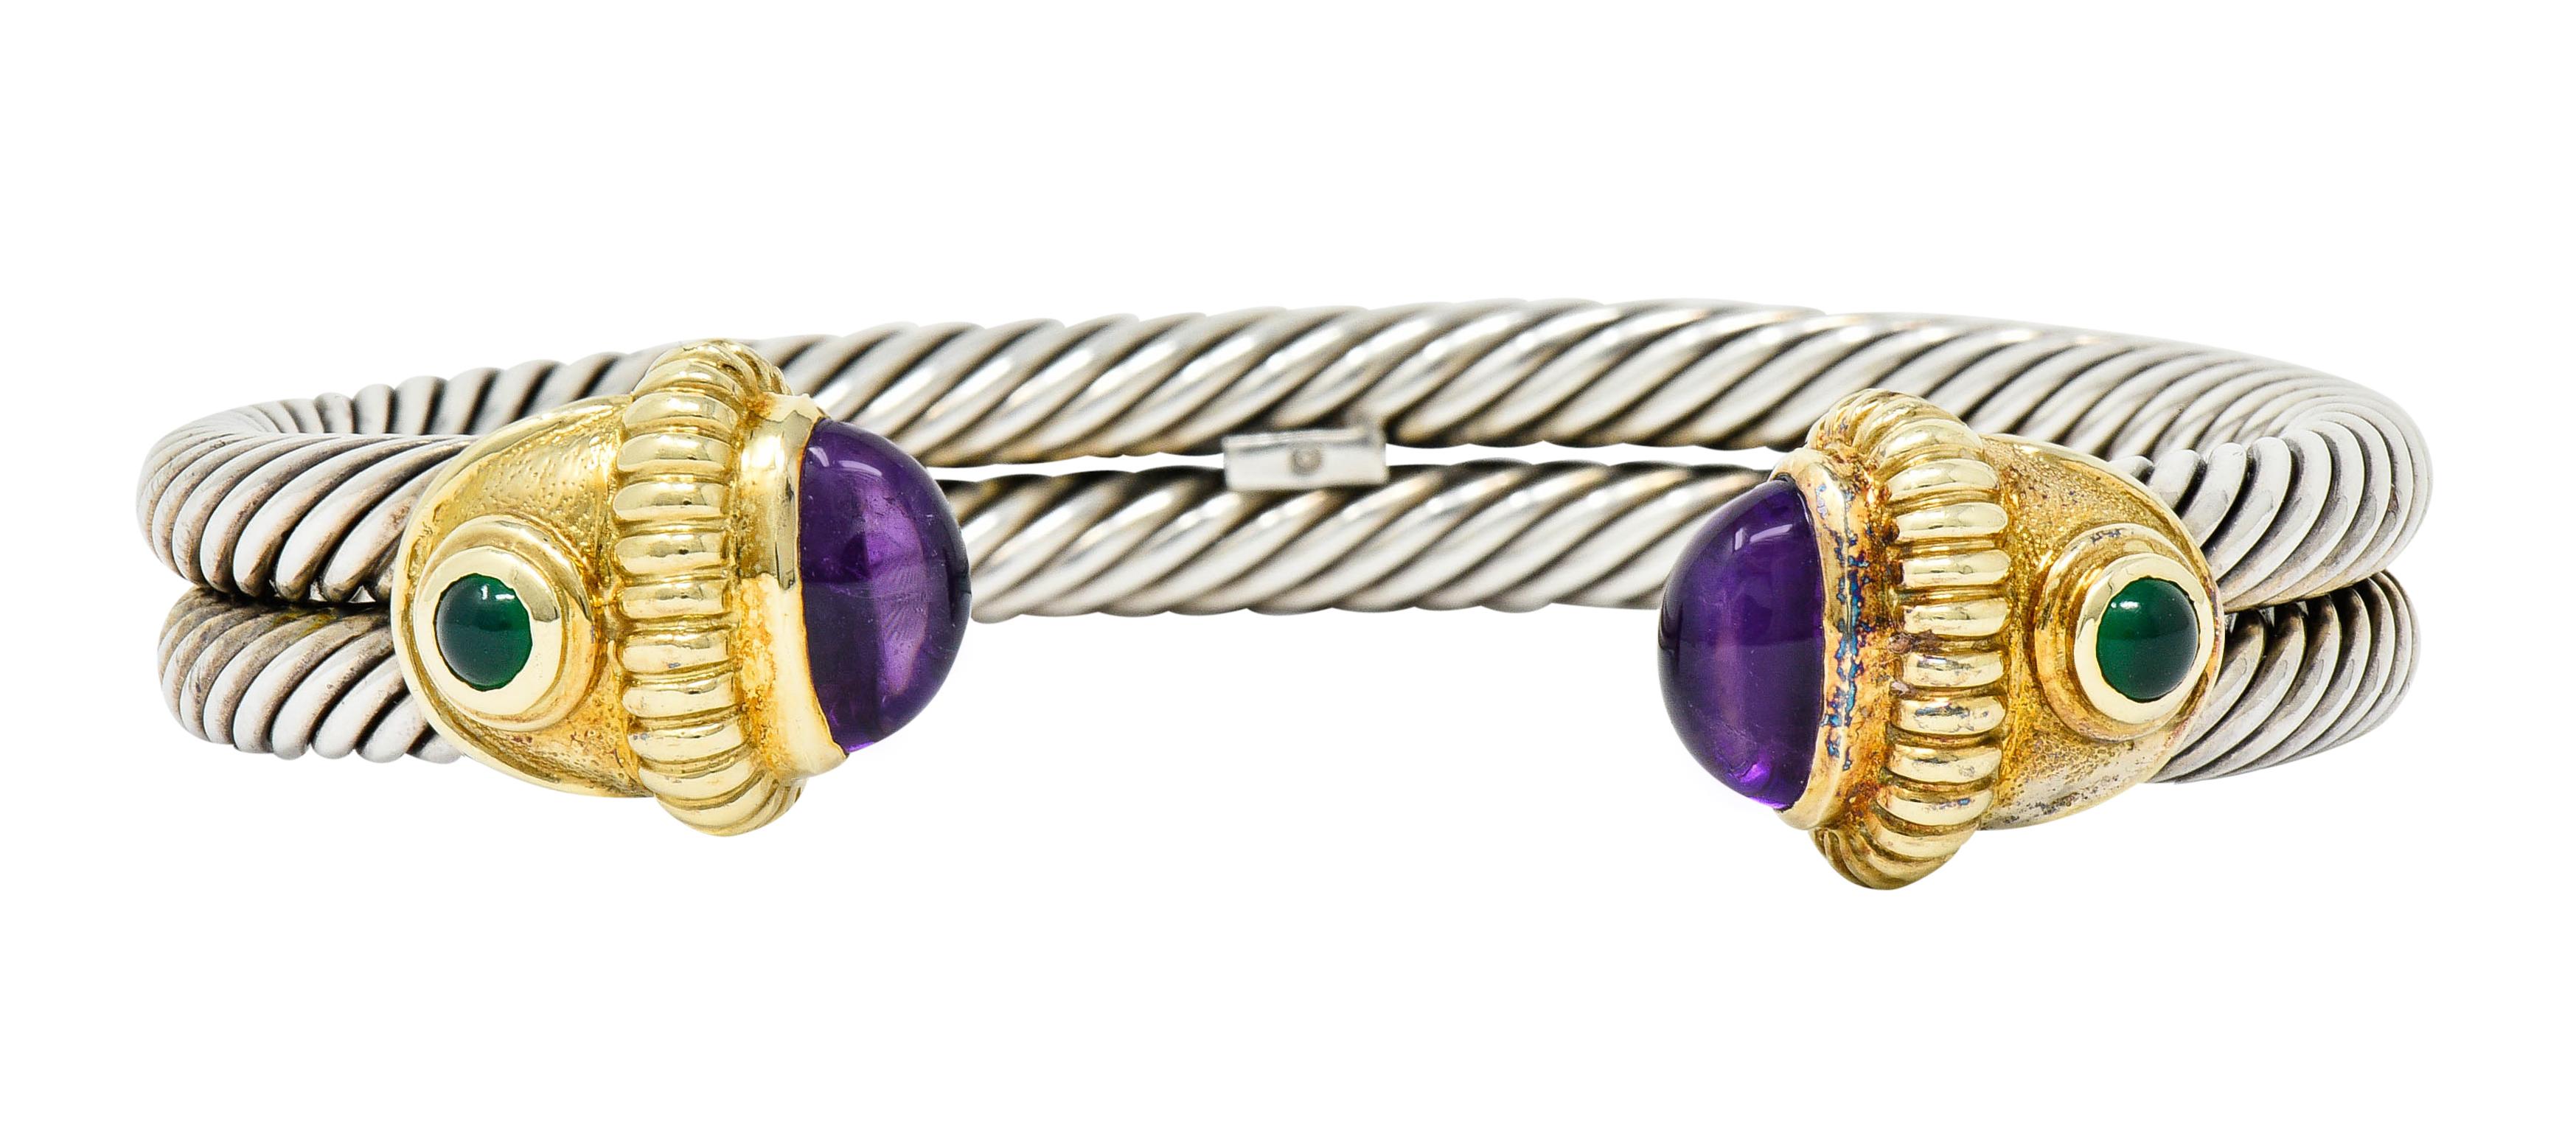 Designed as an open cuff bracelet comprised of a double row of twisted sterling silver cables

With deeply ridged gold terminals completed by amethyst cabochons; medium-dark purple in color

Accented by bright bluish-green and bezel set 3.0 mm